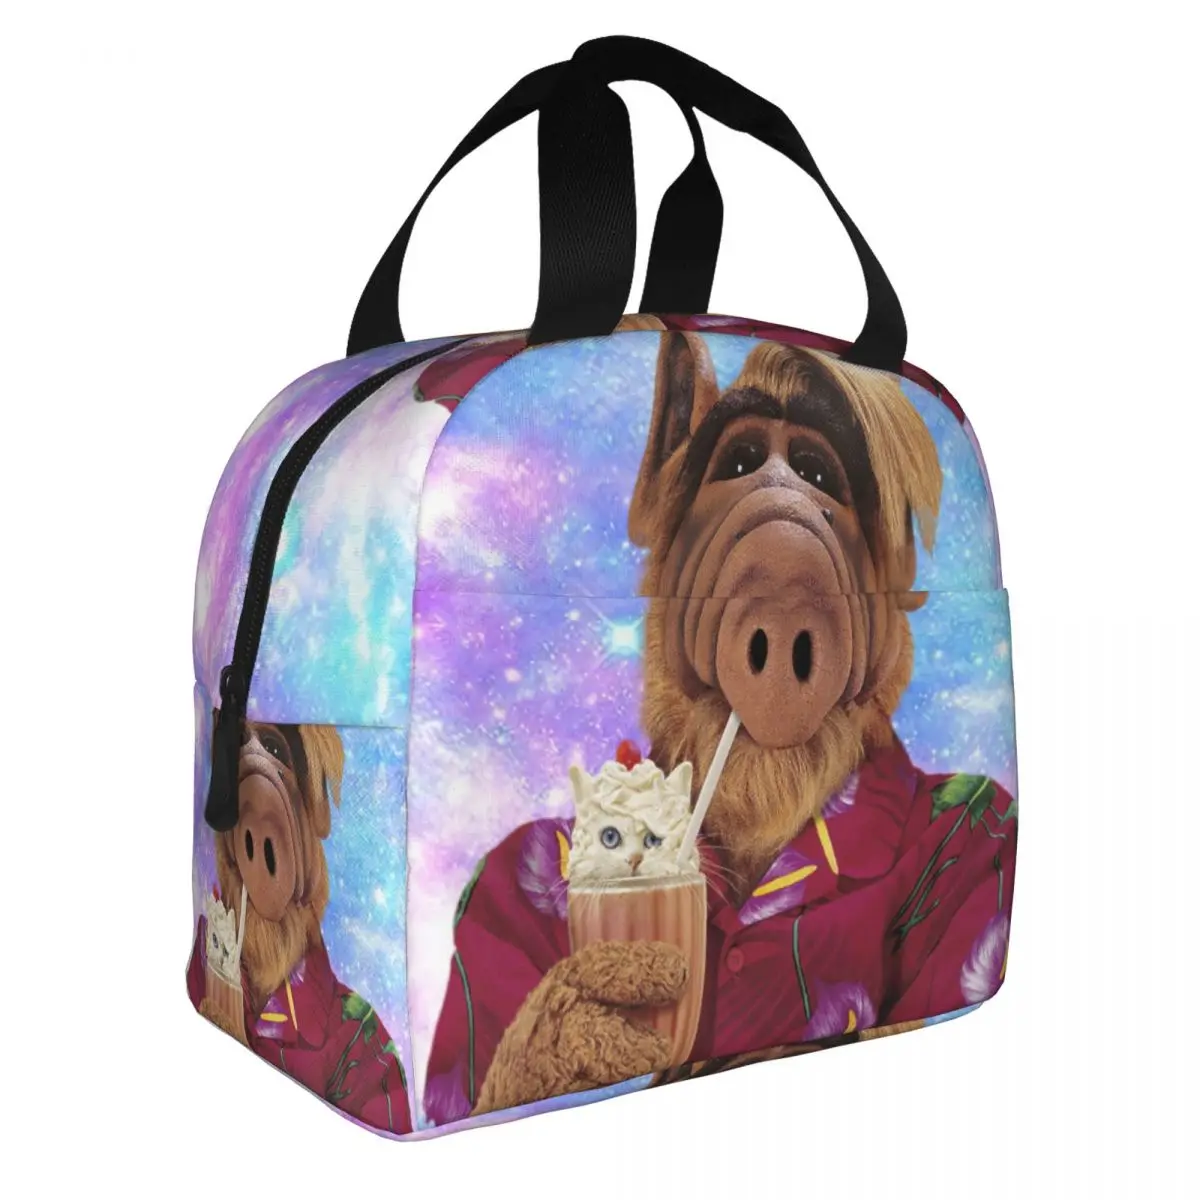 

Funny Alf Meme Lunch Box Women Resuable Leakproof Cooler Thermal Food Insulated Alien Life Form Lunch Bag Kids School Children